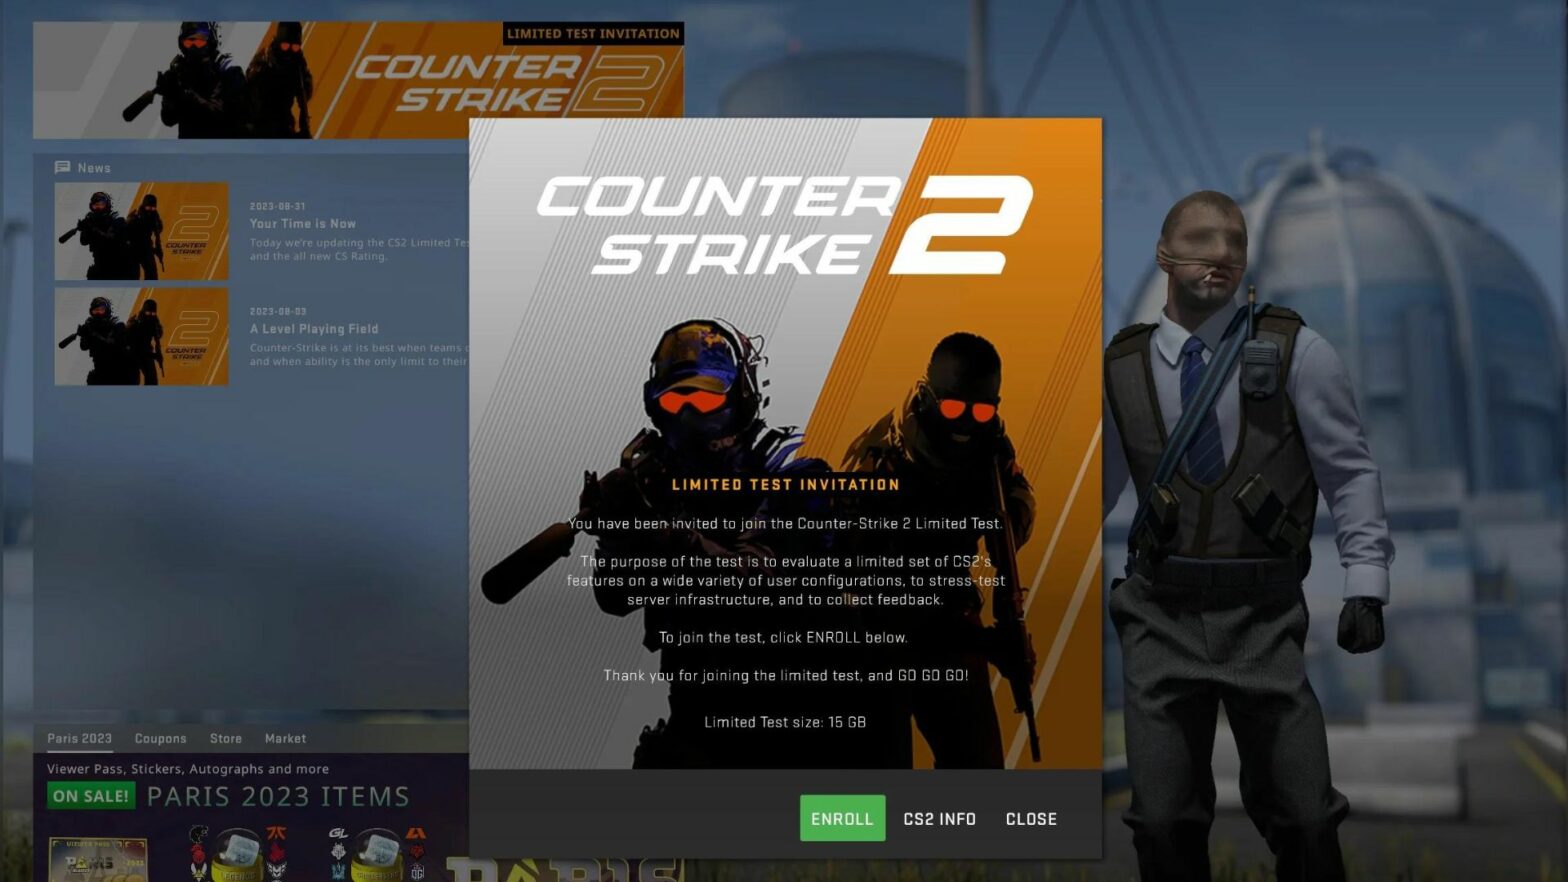 Everything we know about Counter-Strike 2: release date, system